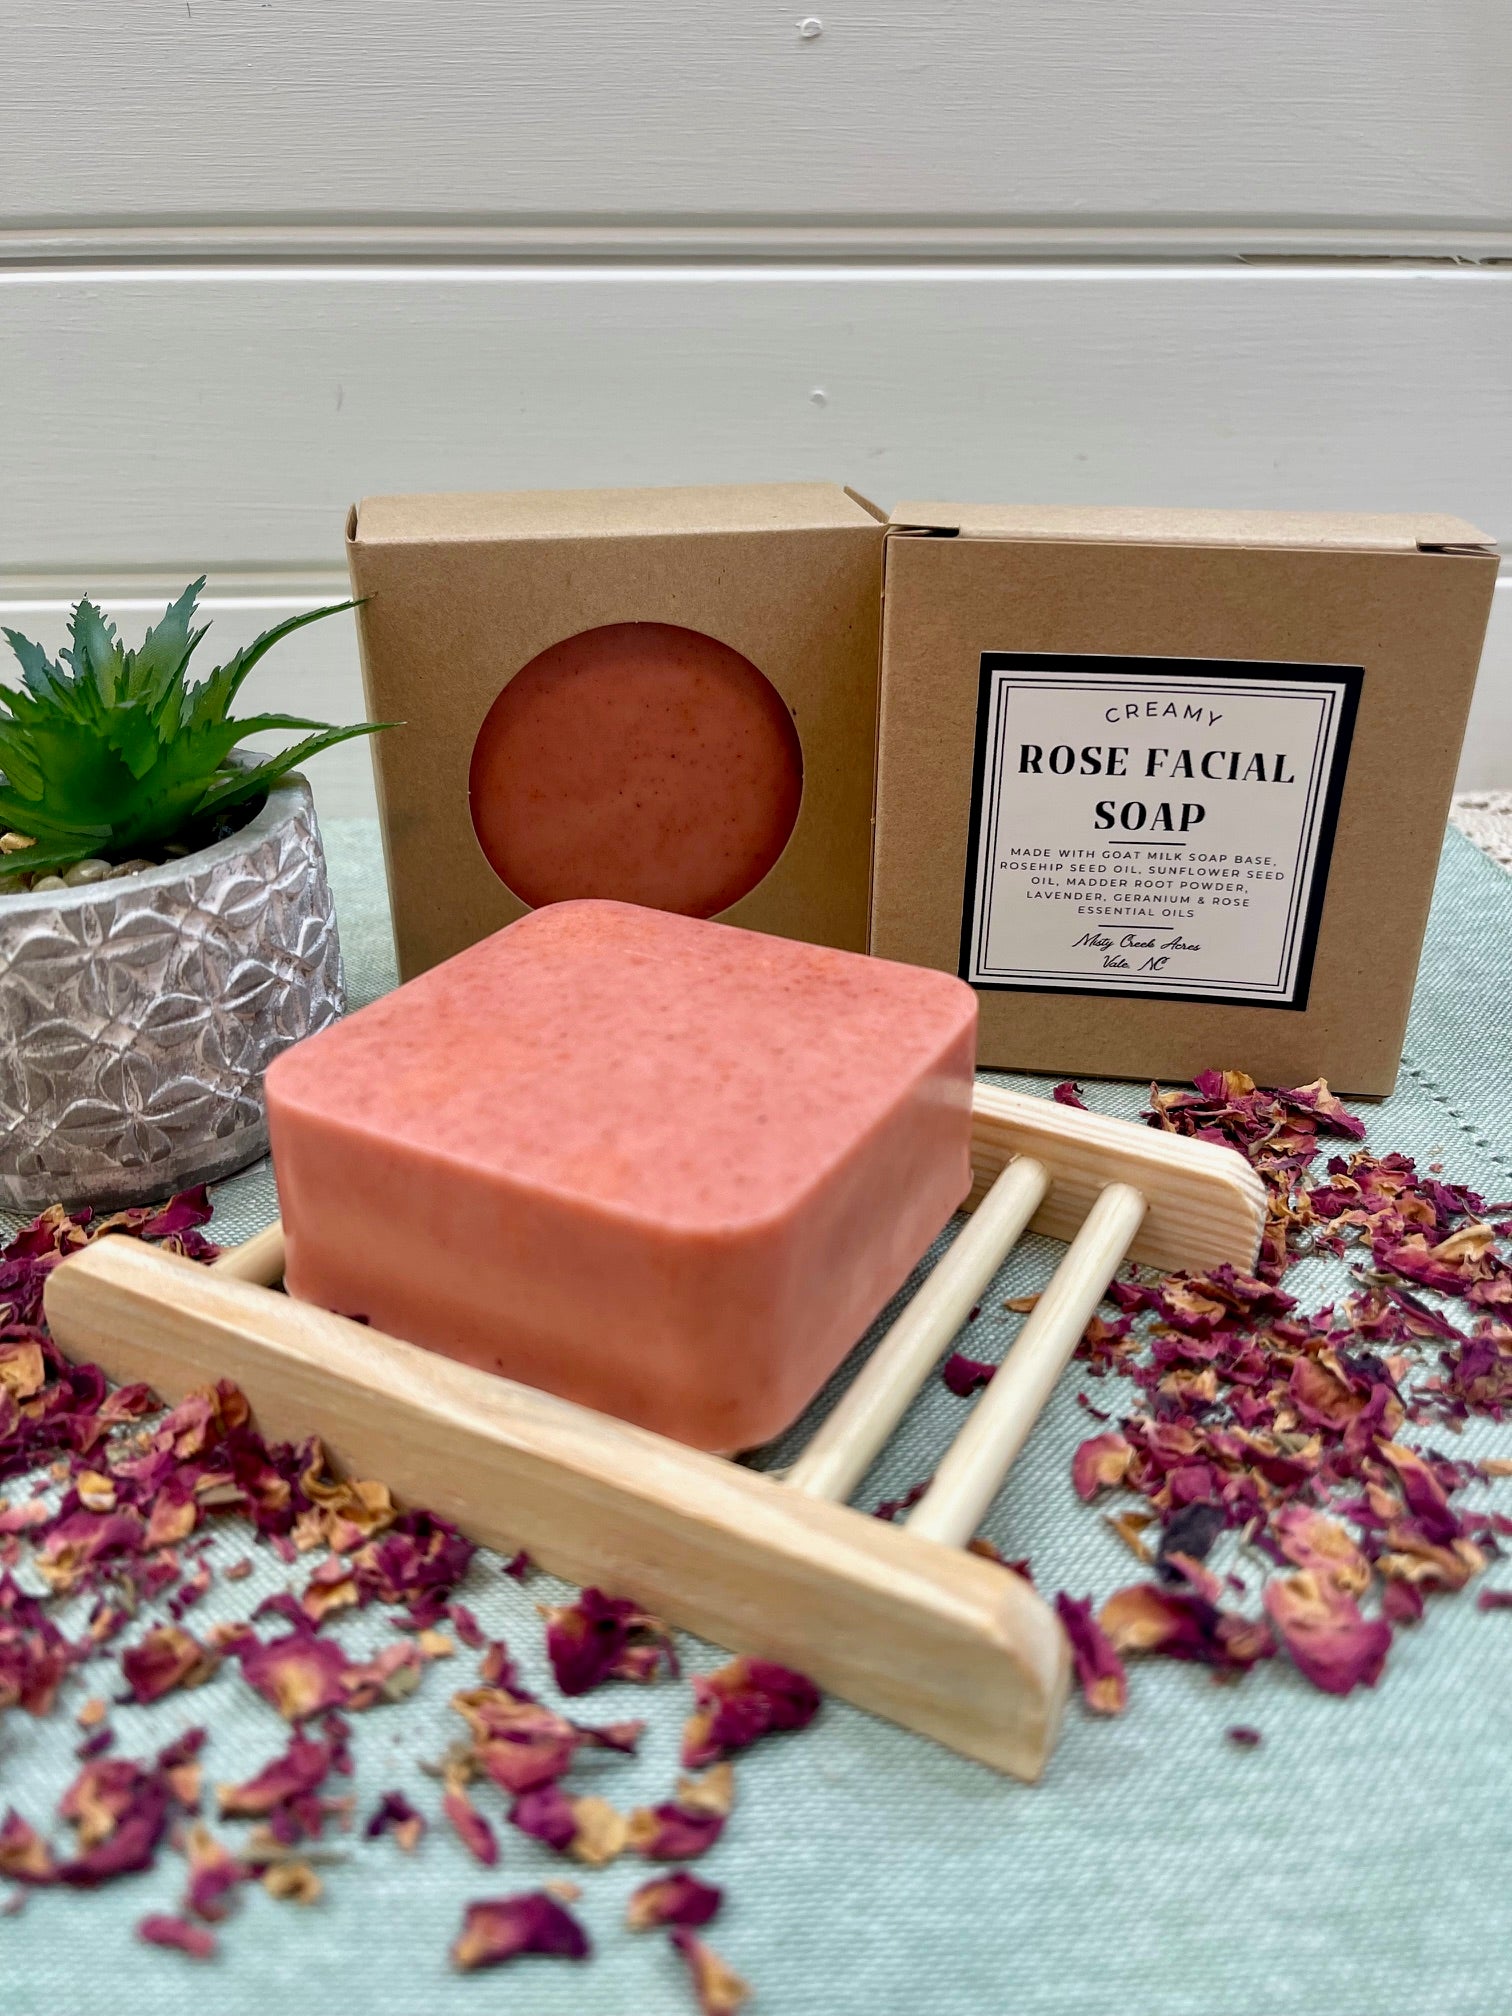 Rose facial soap, rose goat milk soap, non toxic facial soap, non toxic soap, goat milk soap, natural oils soap, non toxic self care, non toxic bath products, gifts for mothers day, self care gift, North Carolina Homestead, North Carolina homemade soap, homemade goat milk soap